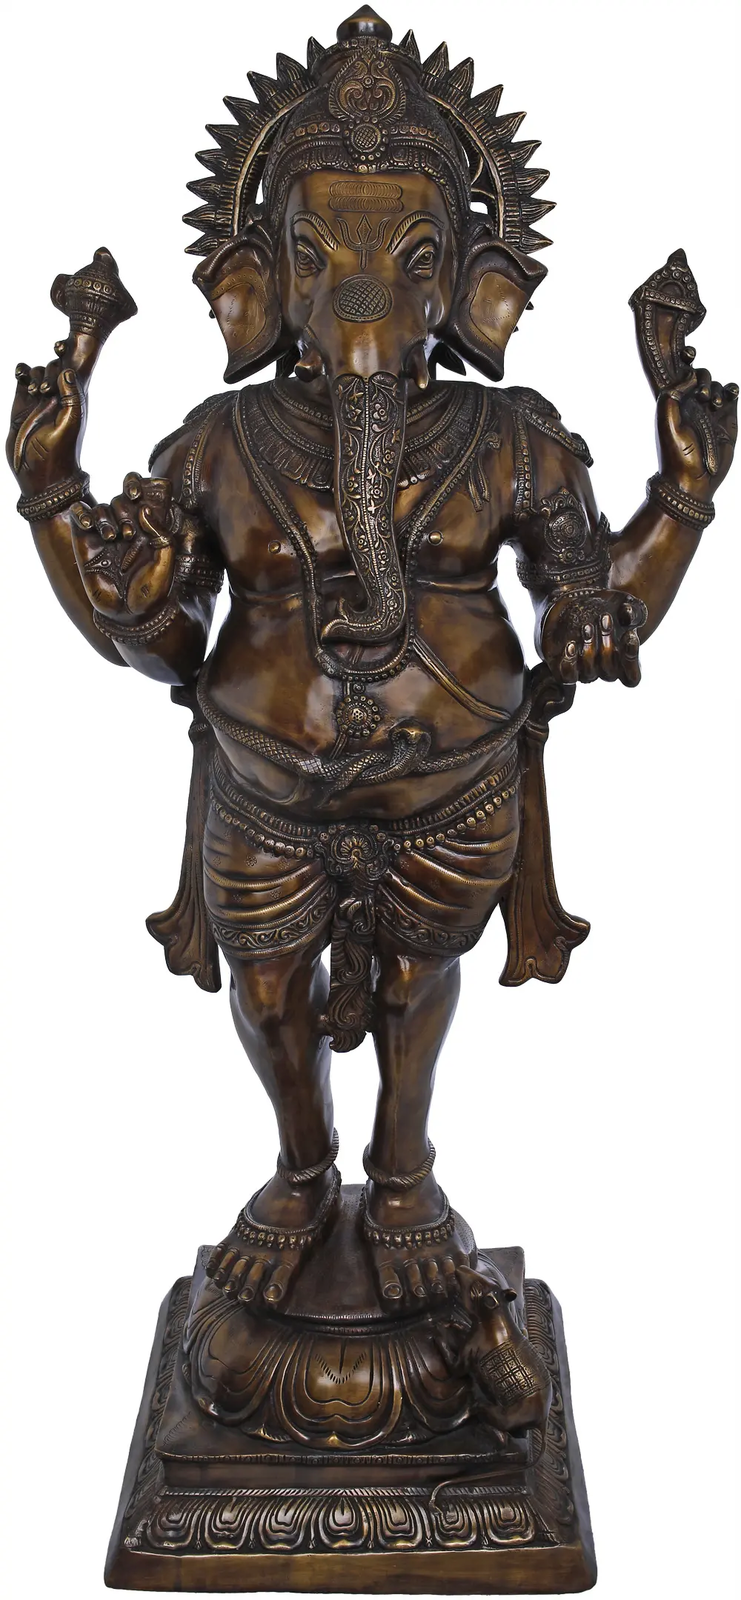 51" An Unconventional Image Of Lord Ganesha In Brass | Handmade | Home Decor - $3,699.00